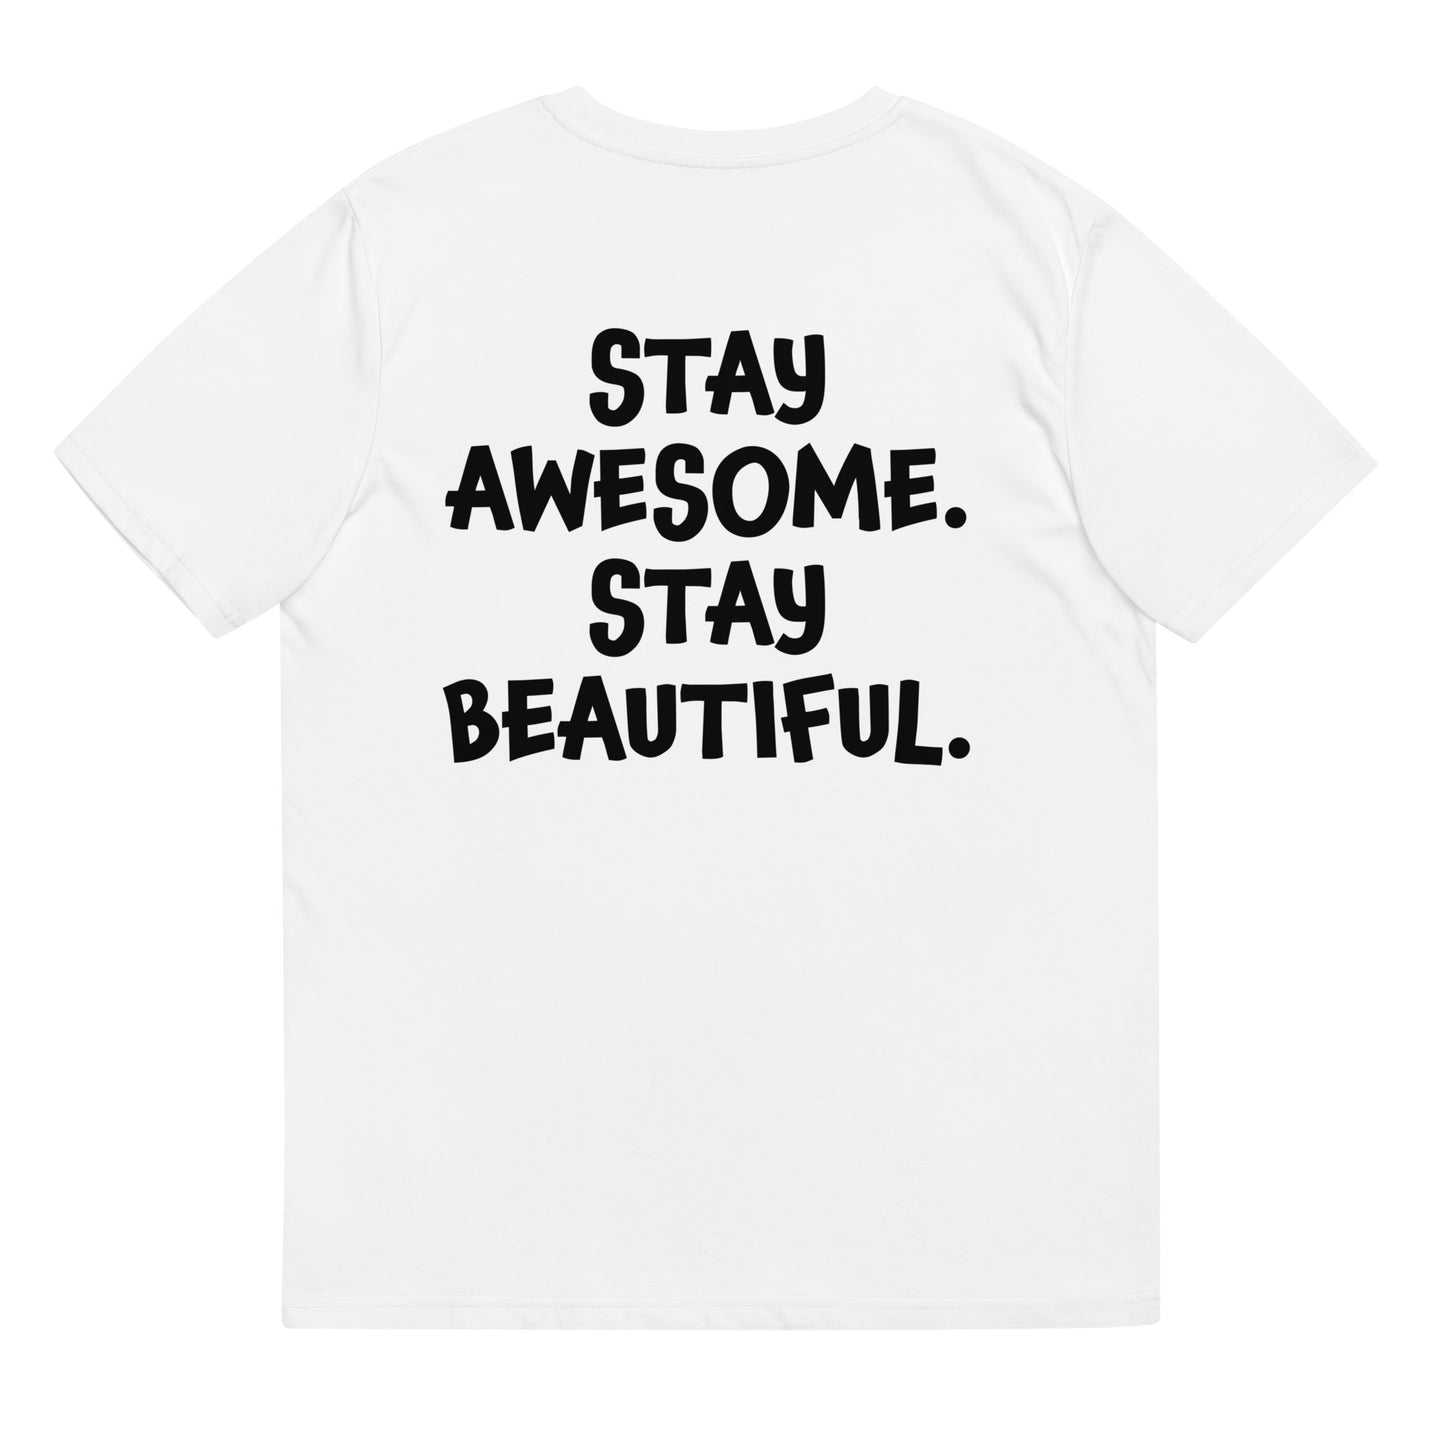 Unisex t-shirt - Stay Awesome. Stay Beautiful. (Black Font)